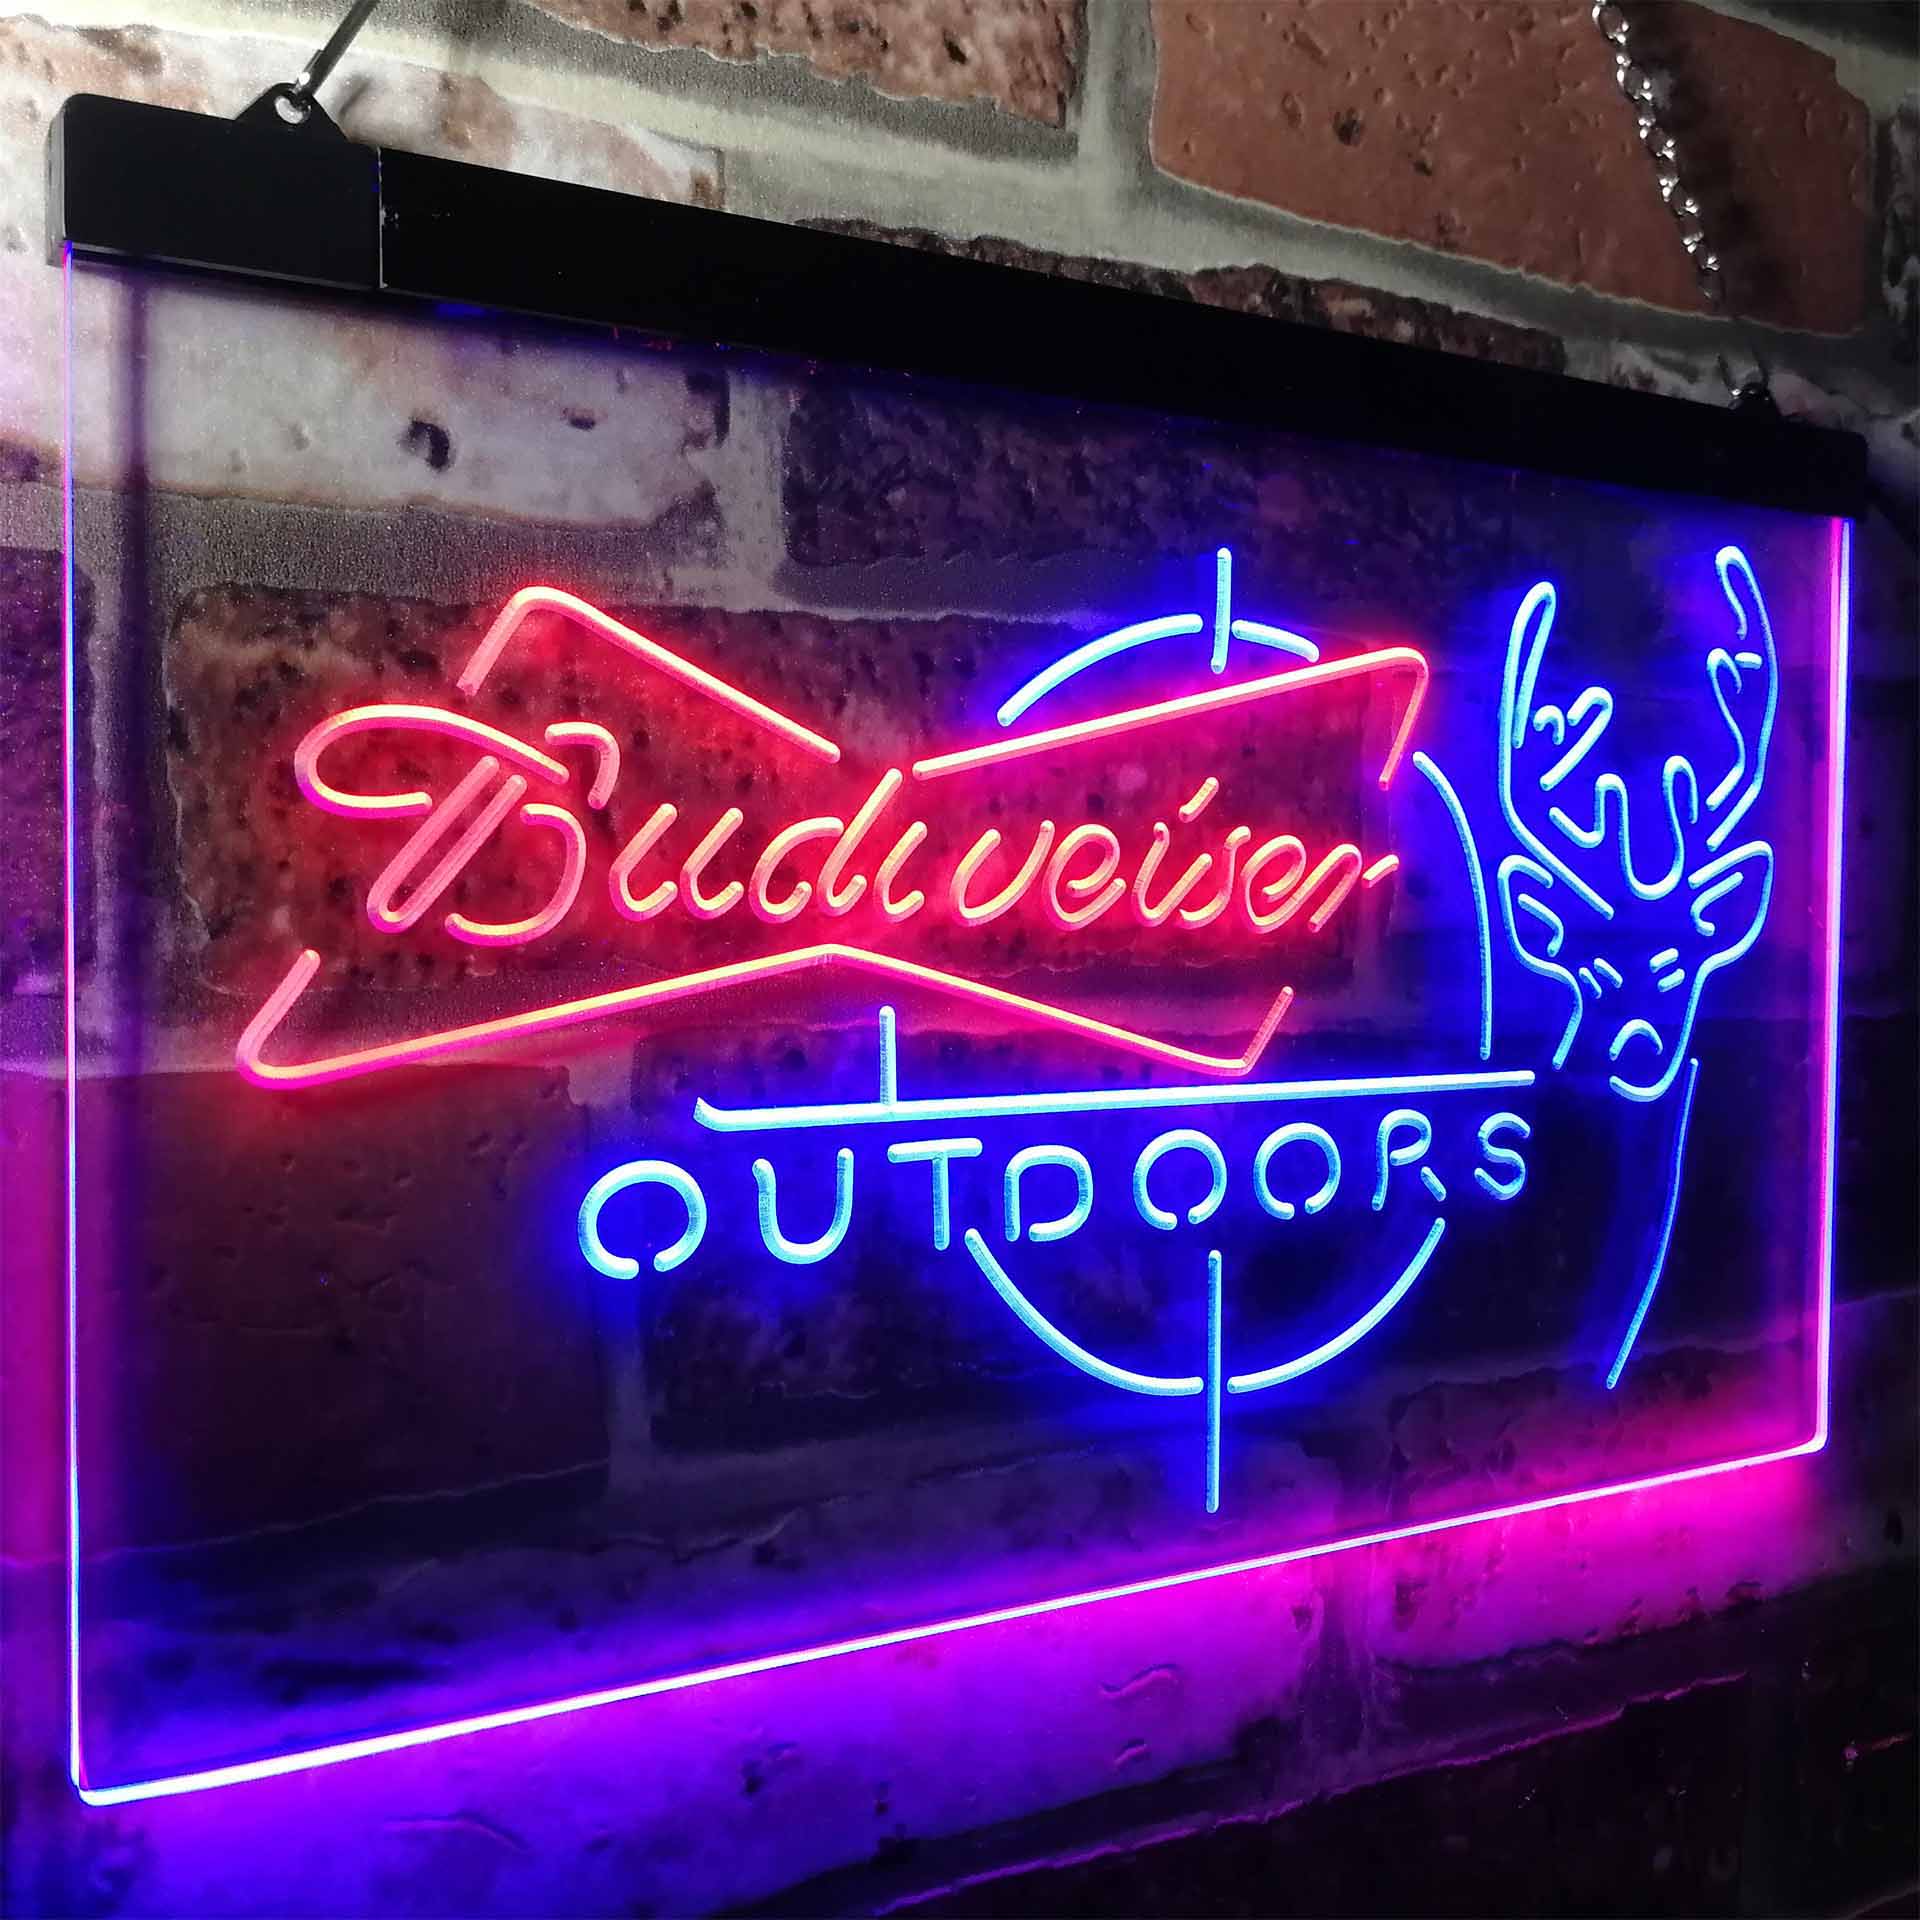 Budweiser Outdoor Hunting Cabin Deer Decor LED Neon Sign